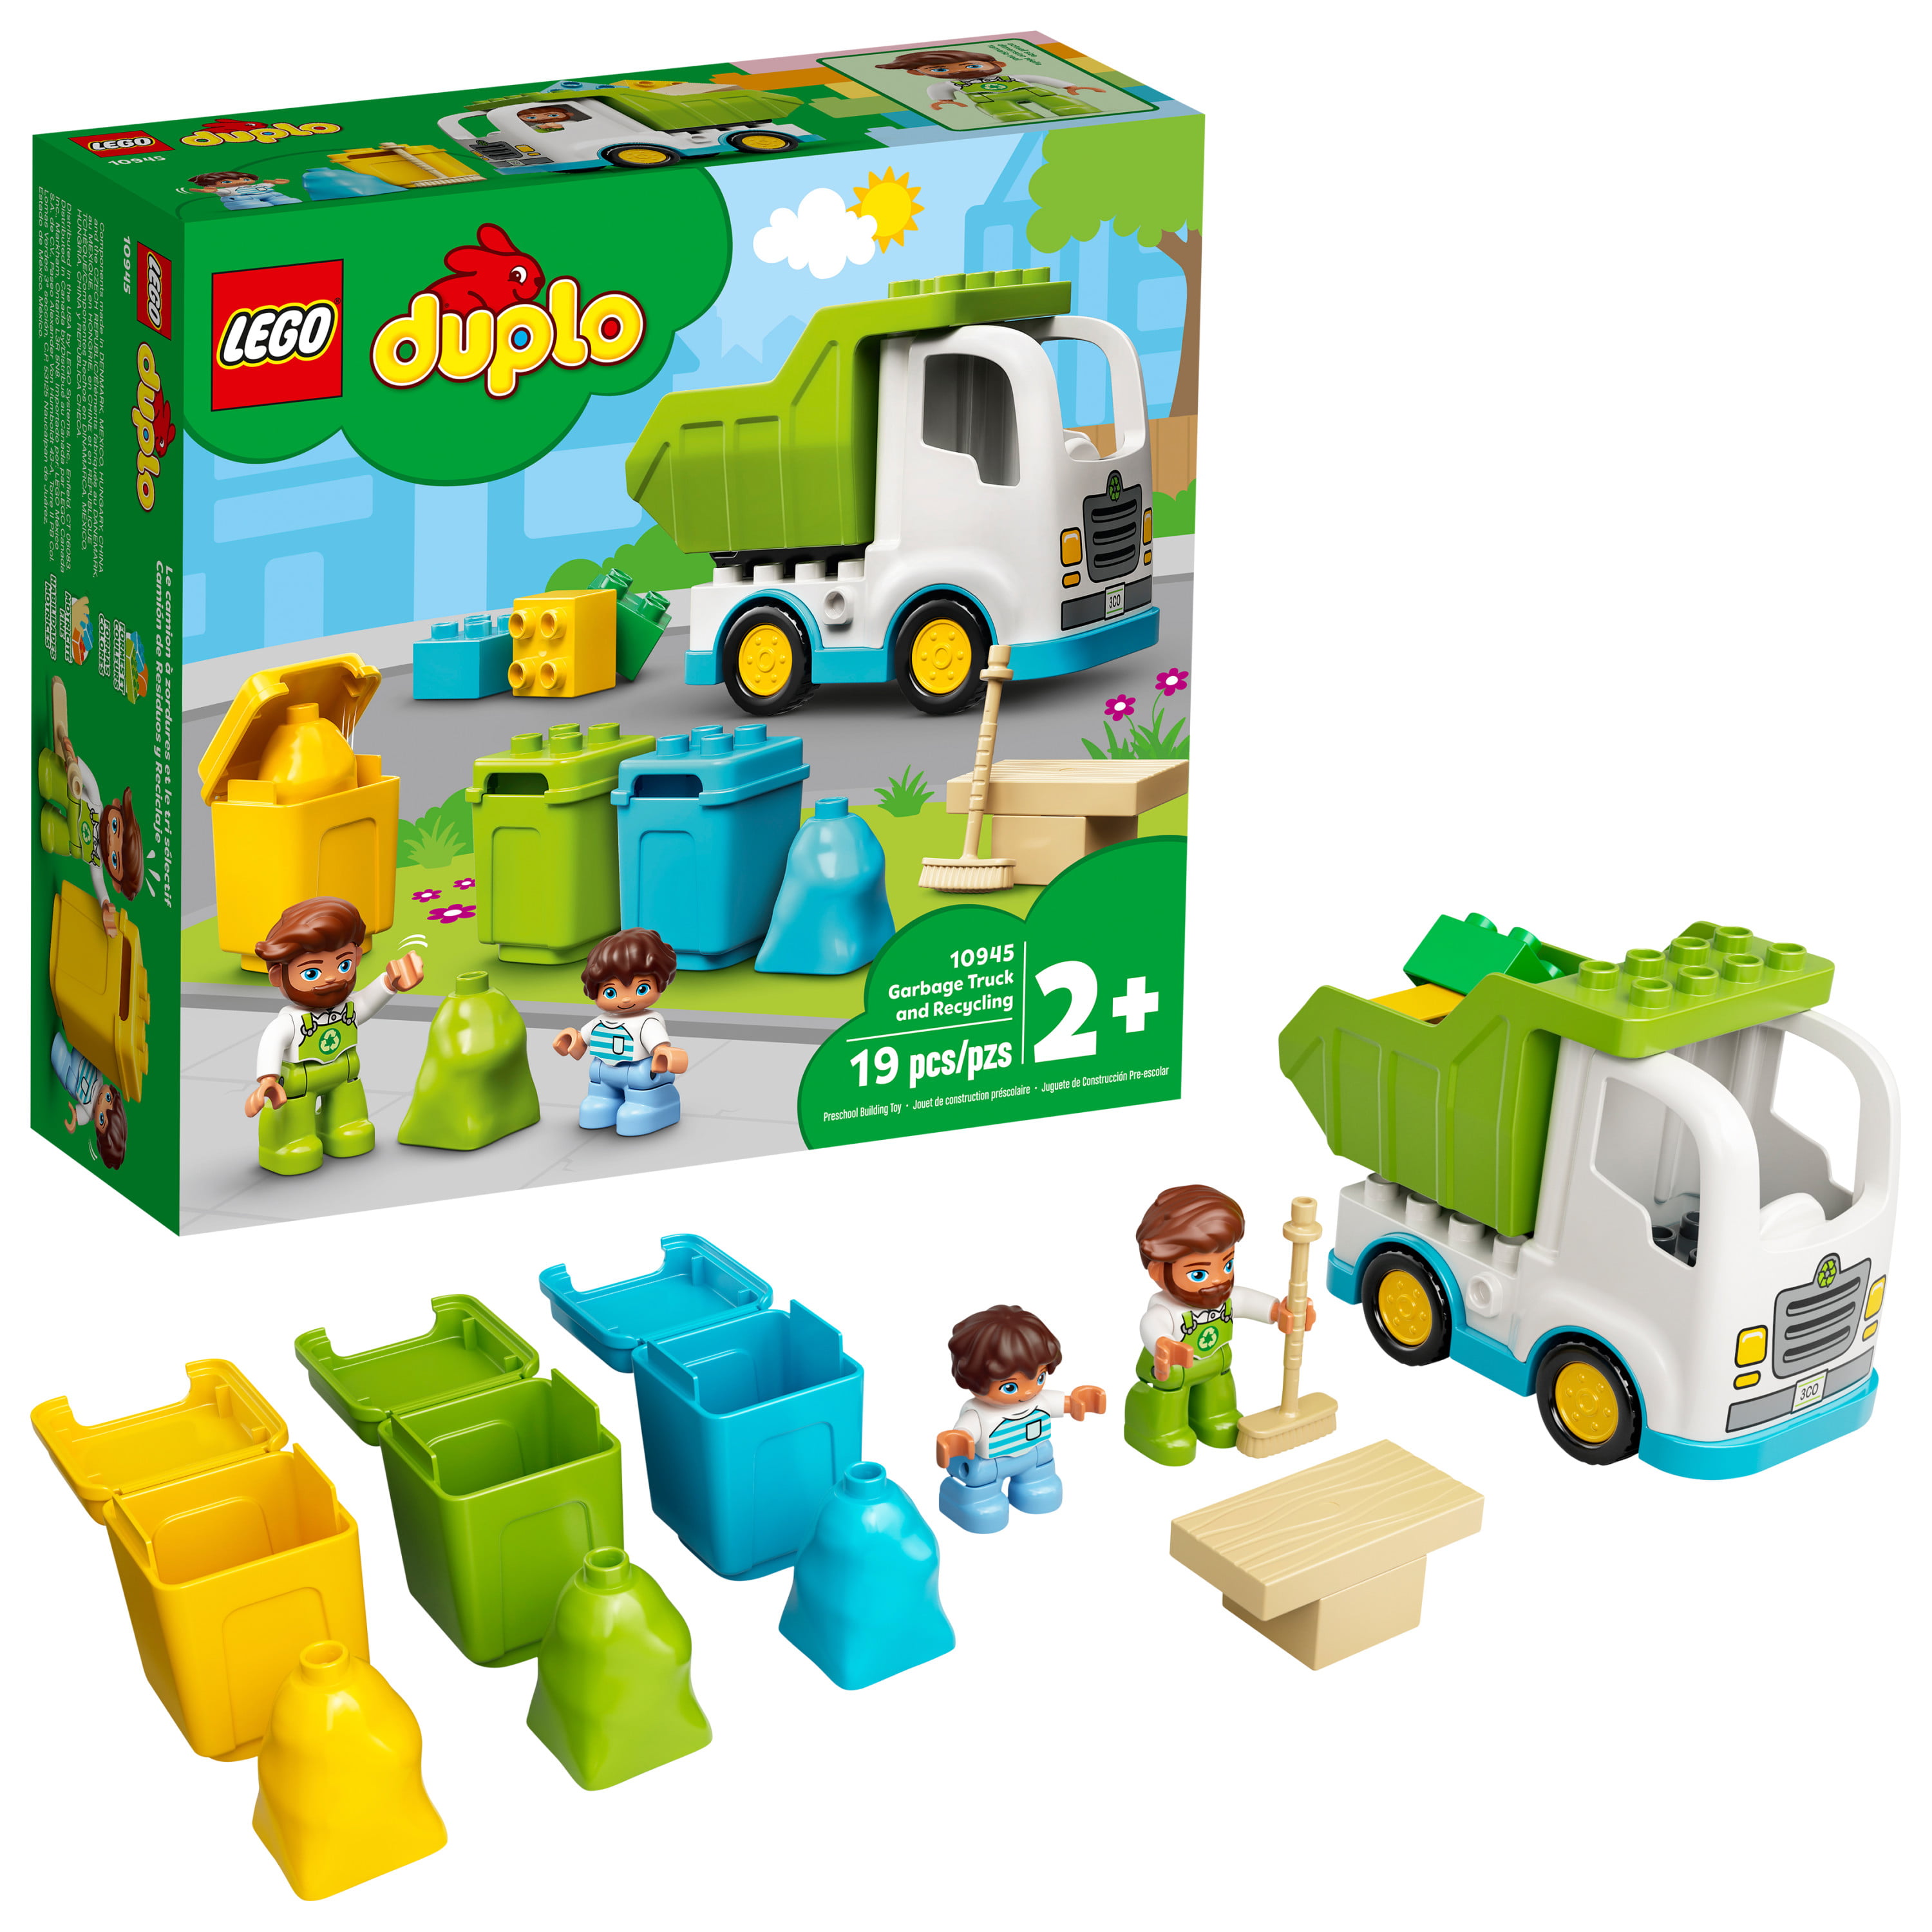 LEGO DUPLO Town Garbage Truck and Recycling 10945 Educational Building Toy for Toddlers and Kids 